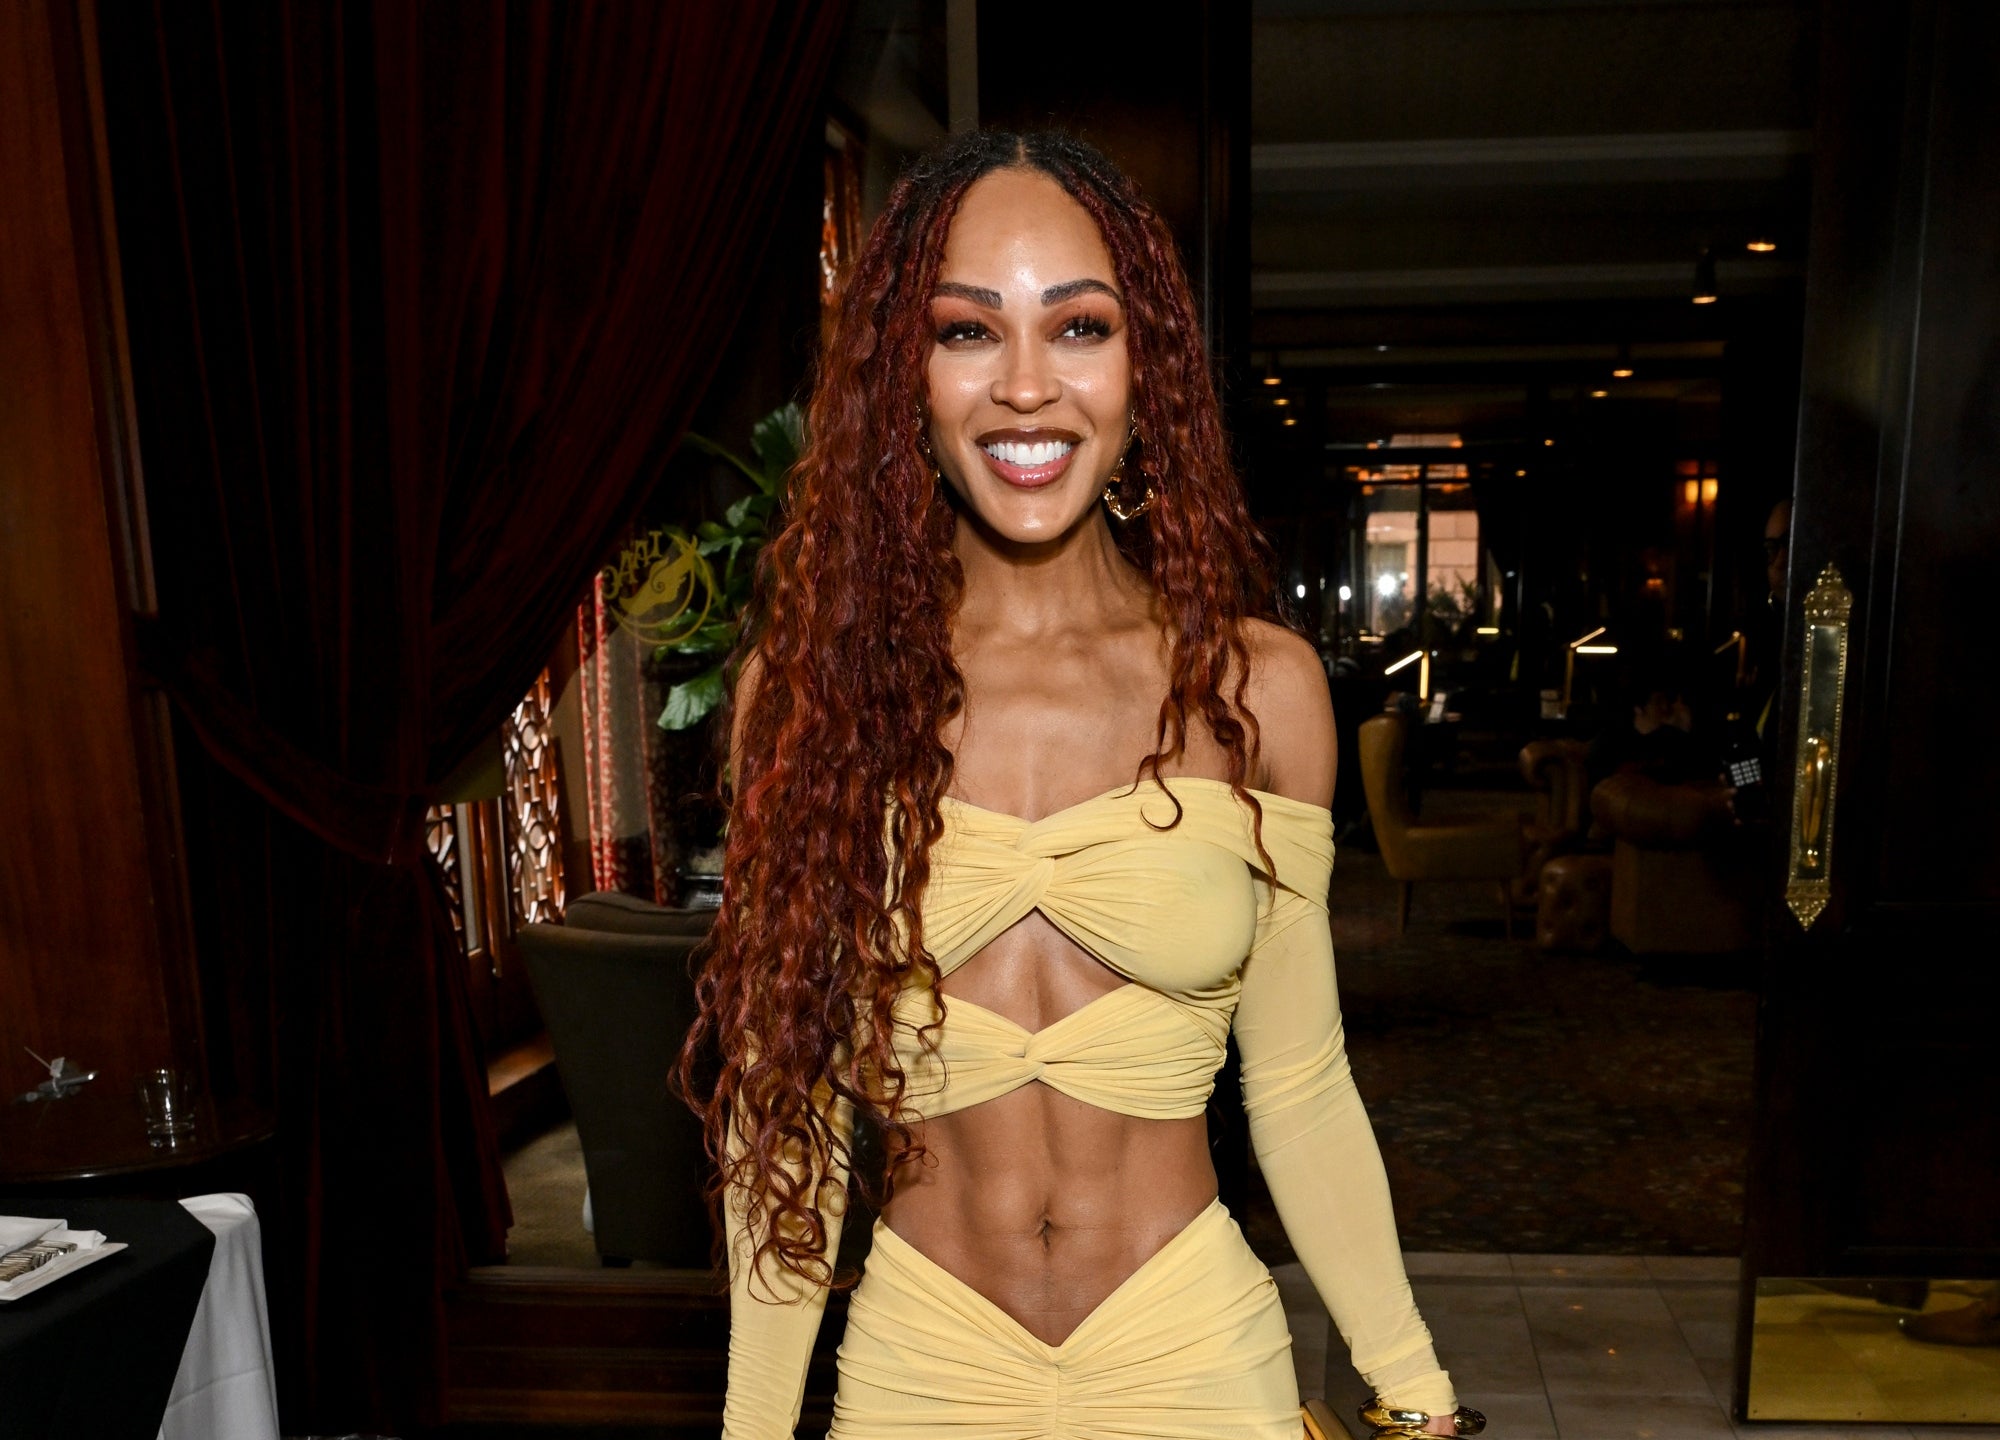 Here’s How To Get Meagan Good’s Enviable Abs